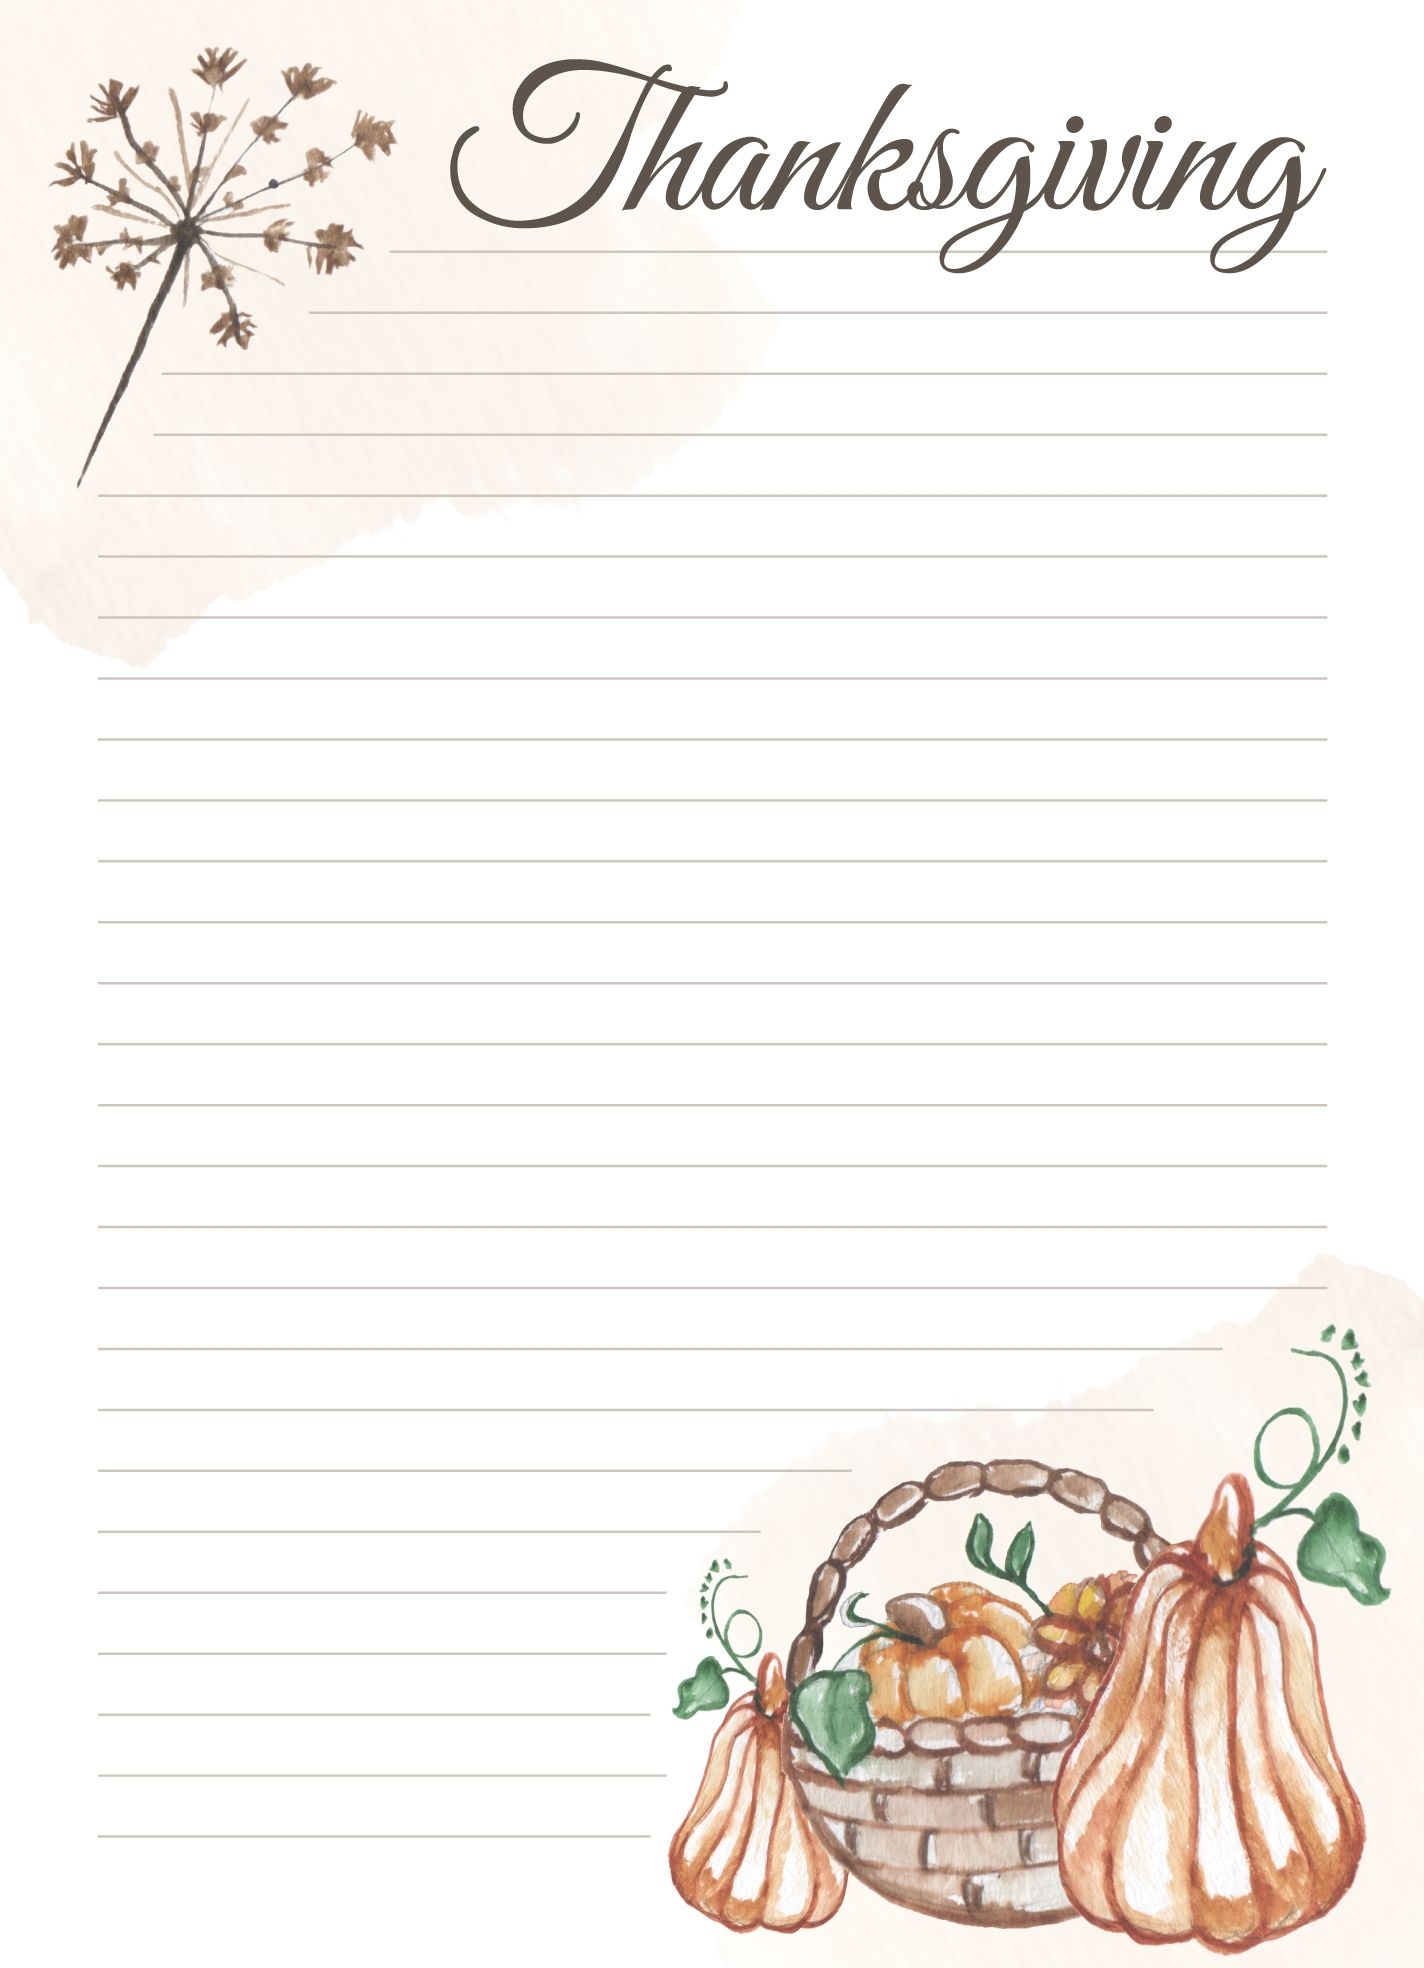 Thanksgiving Lined Paper Free Google Docs Template Free Printable Stationery Thanksgiving Planner Thanksgiving Note